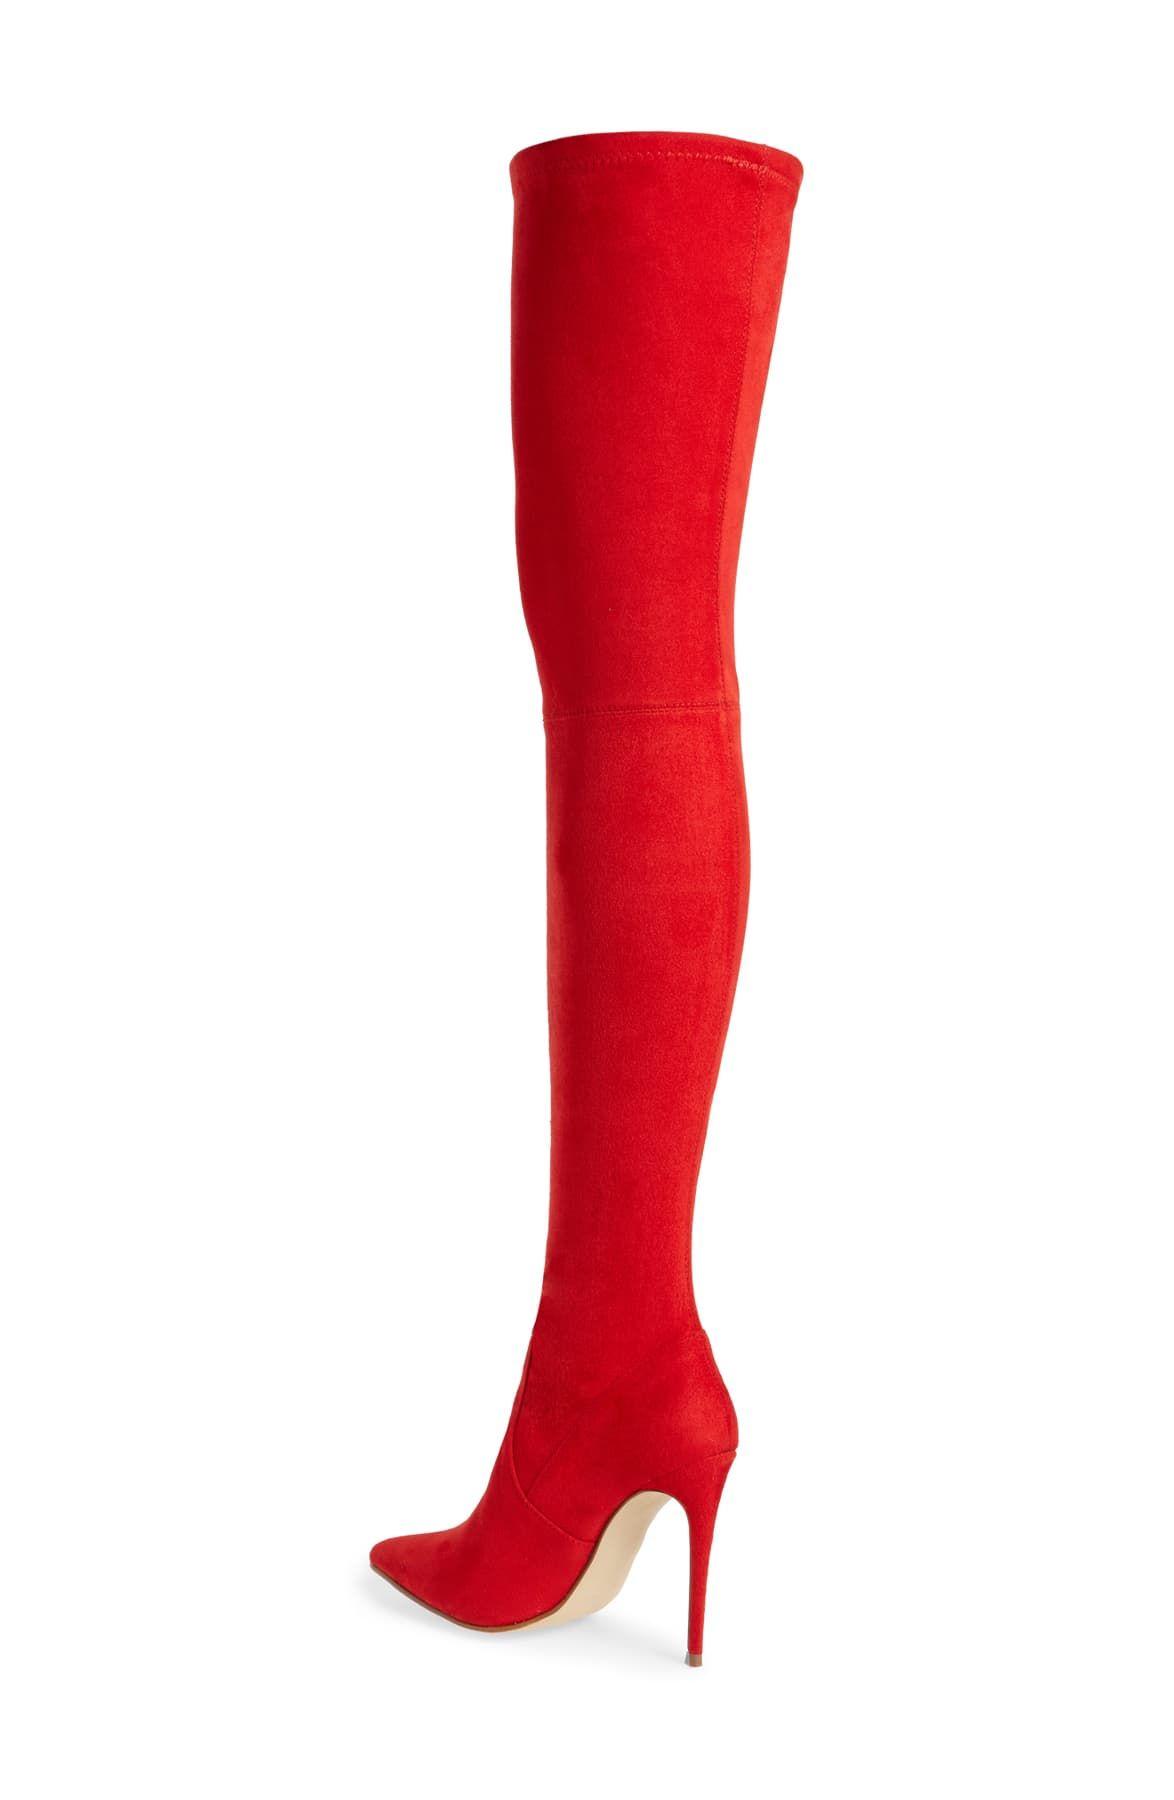 Steve Madden Dominique Thigh High Boot in Red | Lyst